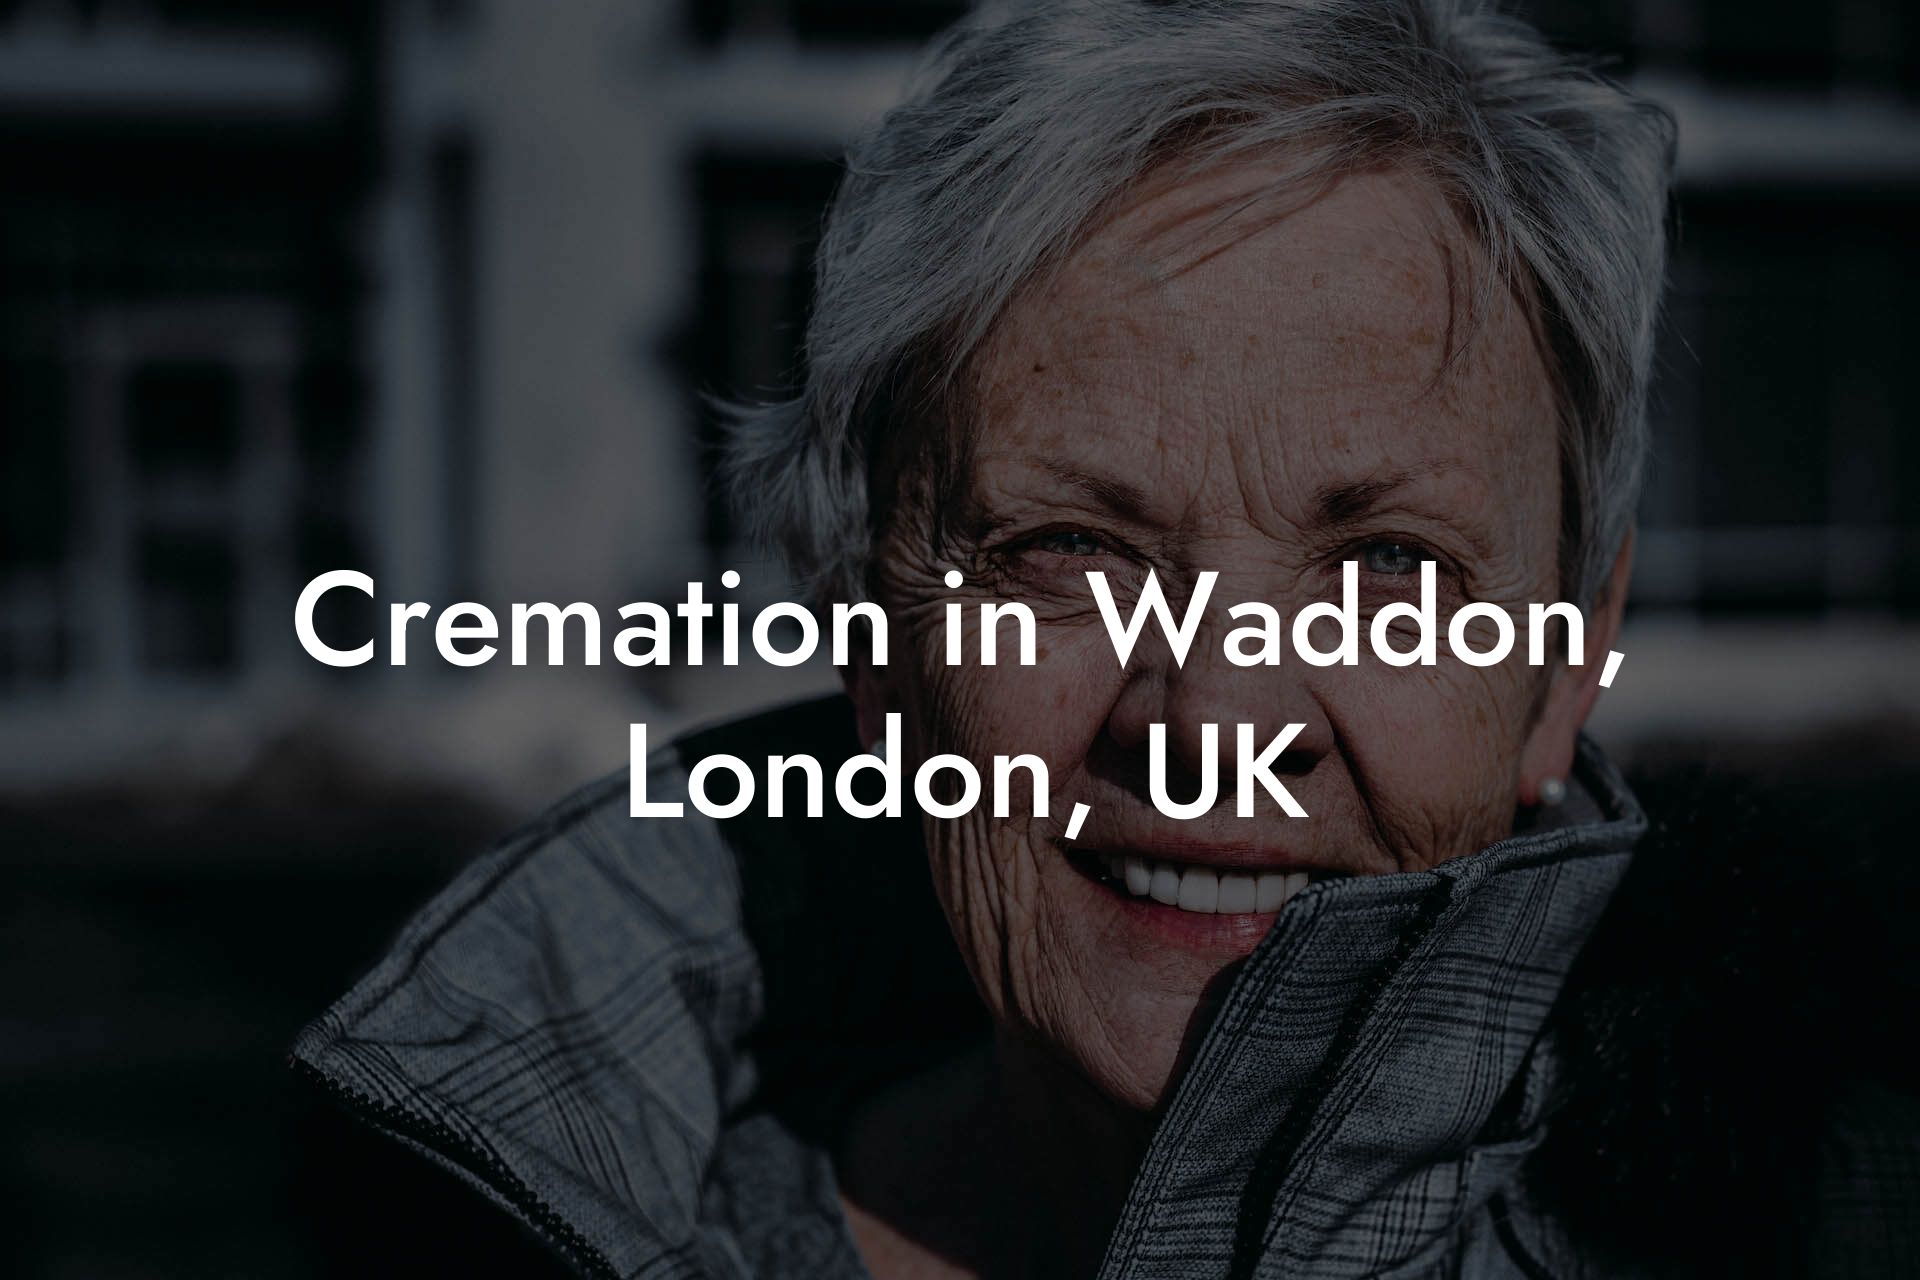 Cremation in Waddon, London, UK